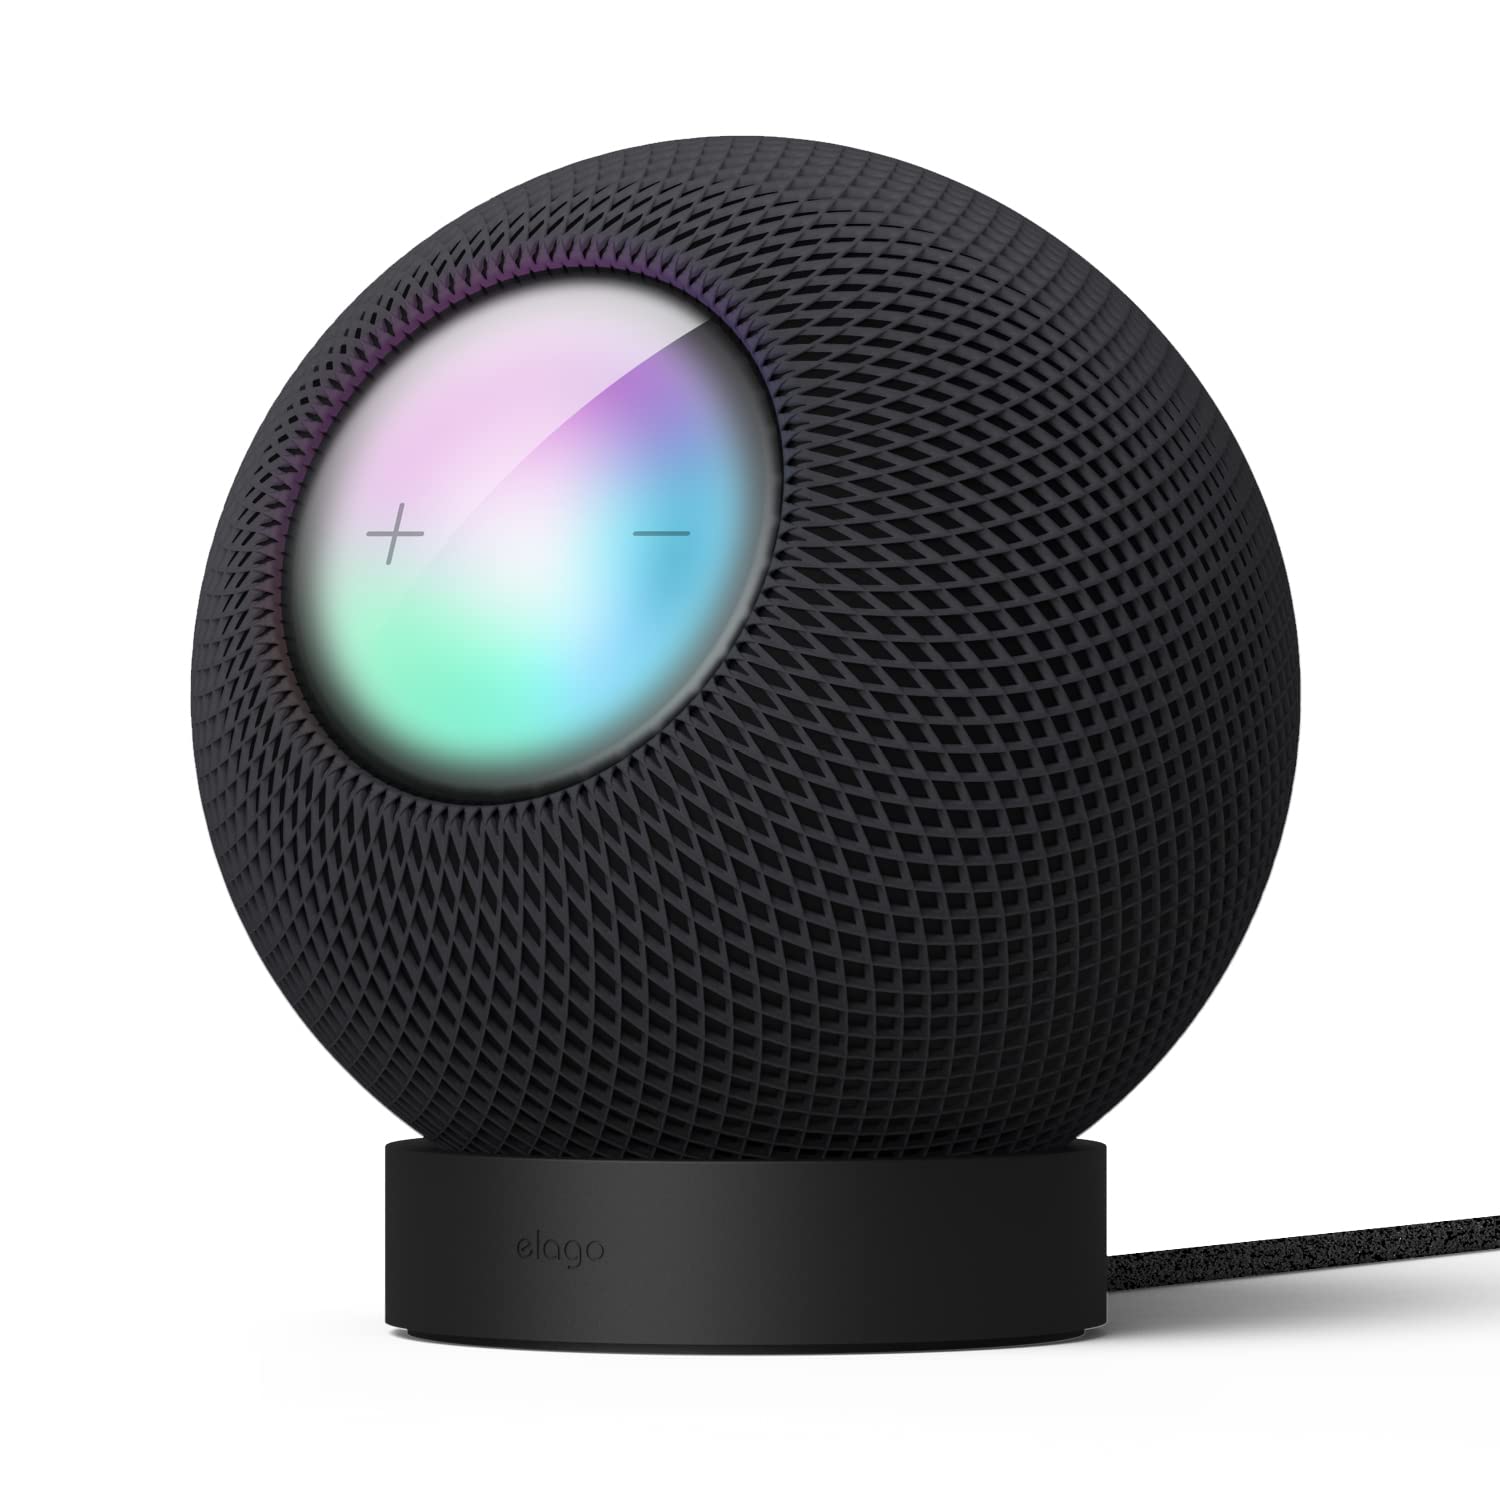 elago Stand Compatible with HomePod Mini - Proper EQ, Easier to Control with Better Indicator Visibility, Stable Mount, Anti-Slip Silicone Stand (Black)